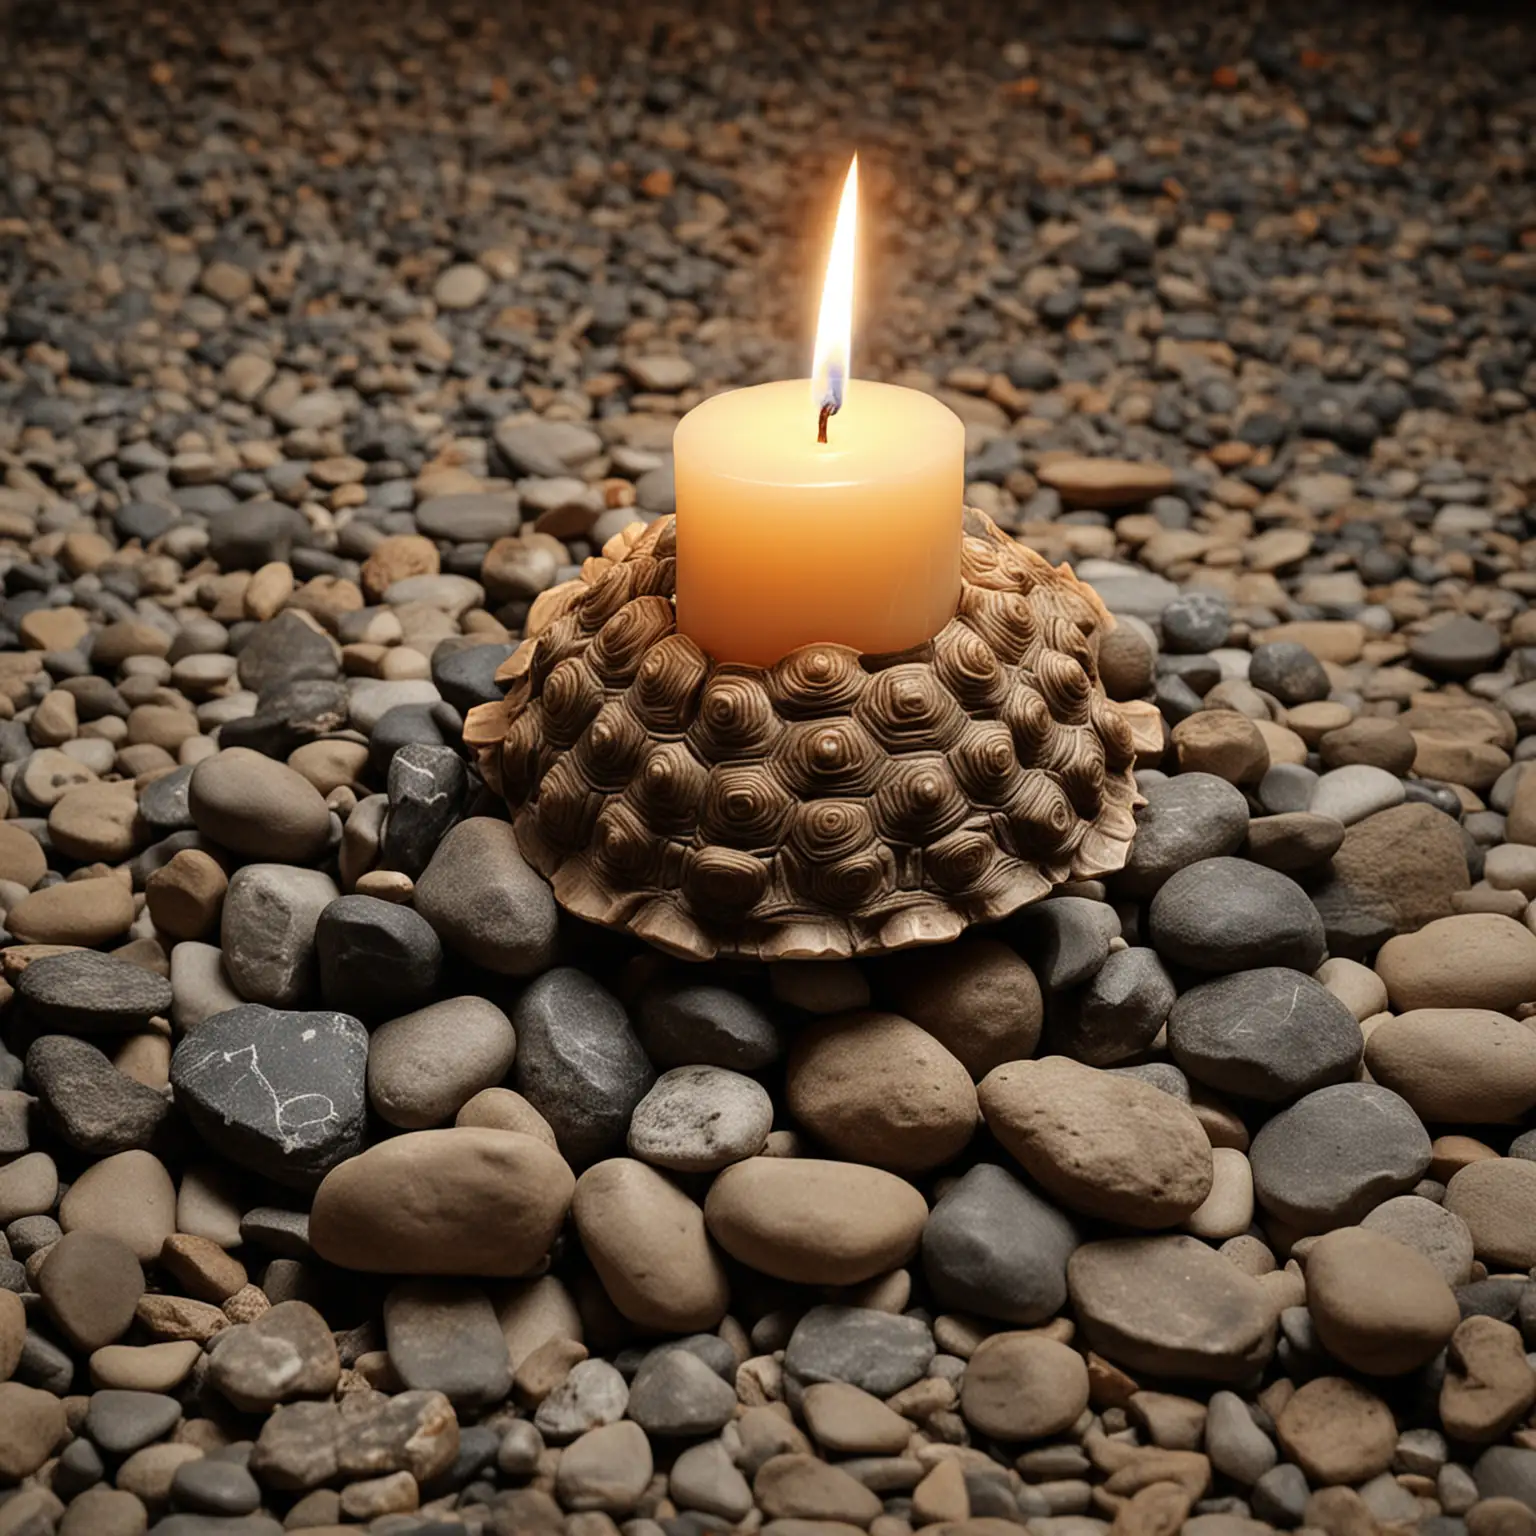 Candle-Turtle-and-Stone-Pile-in-Tranquil-Zen-Garden-Setting